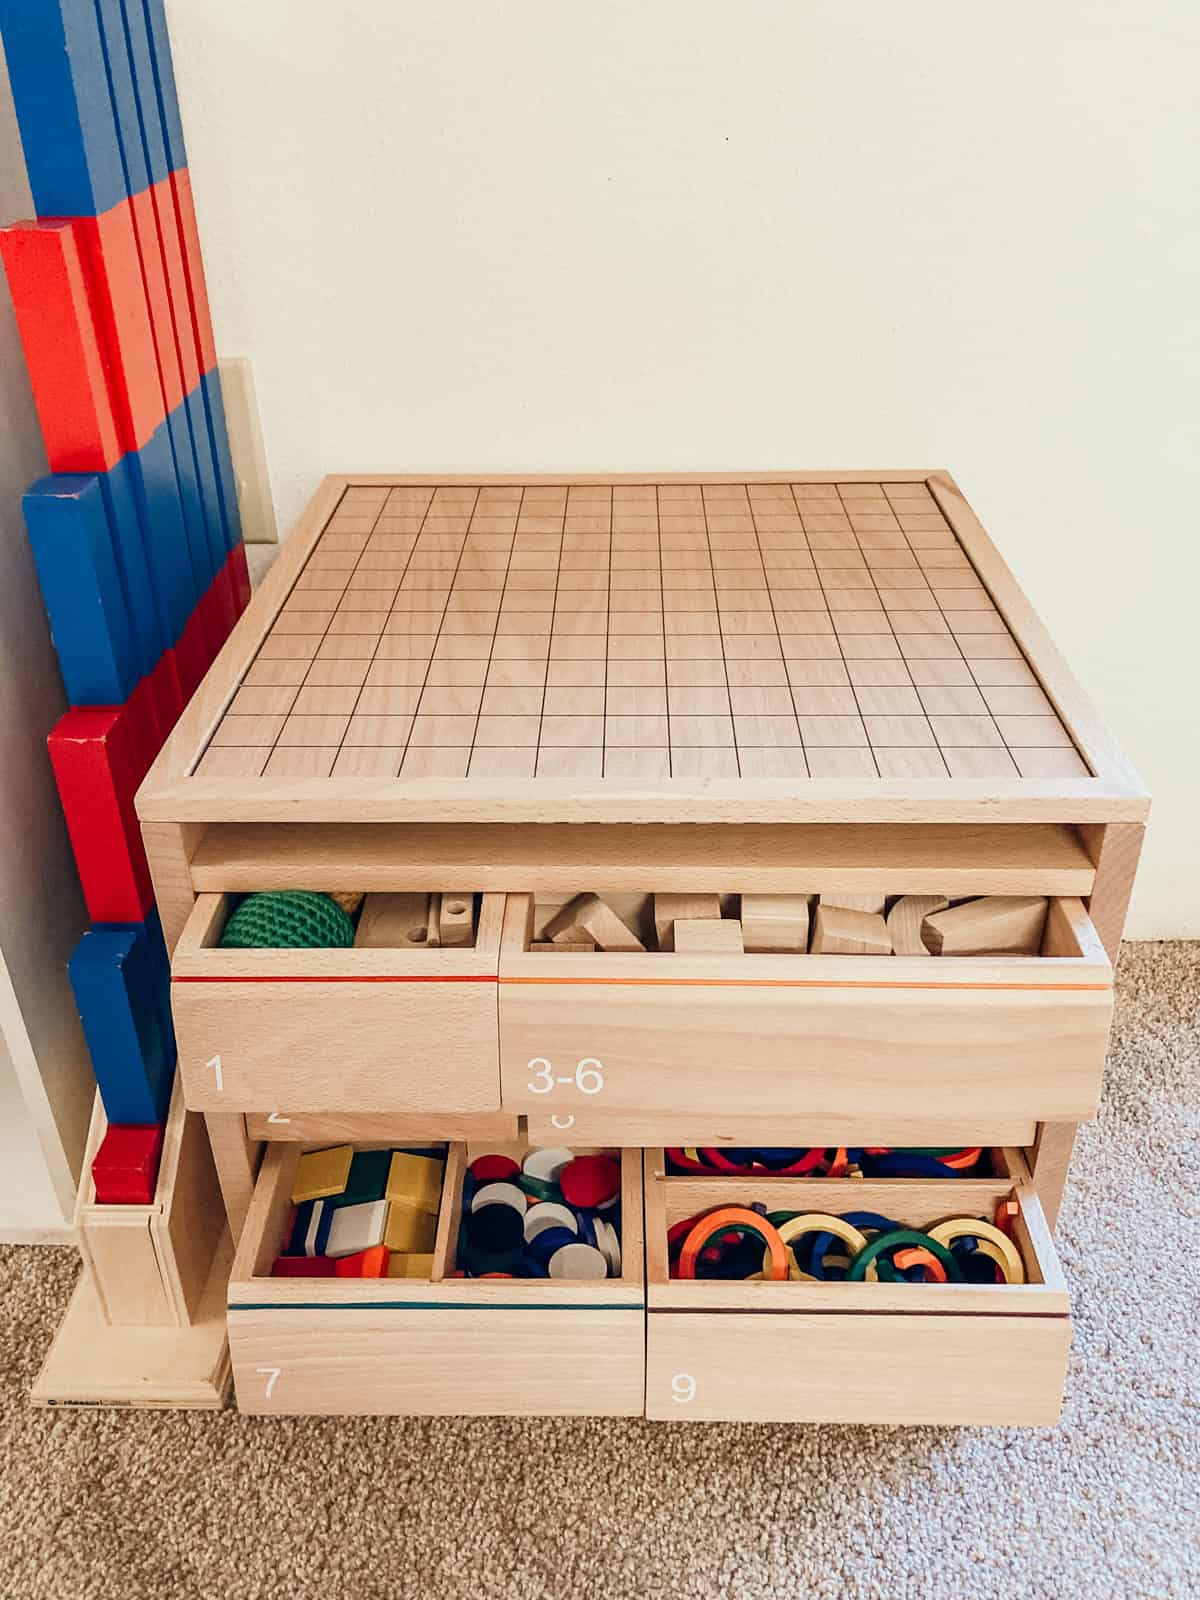 The best homeschooling curriculum includes the Spielgaben cabinet. The drawers are open to display manipulatives.